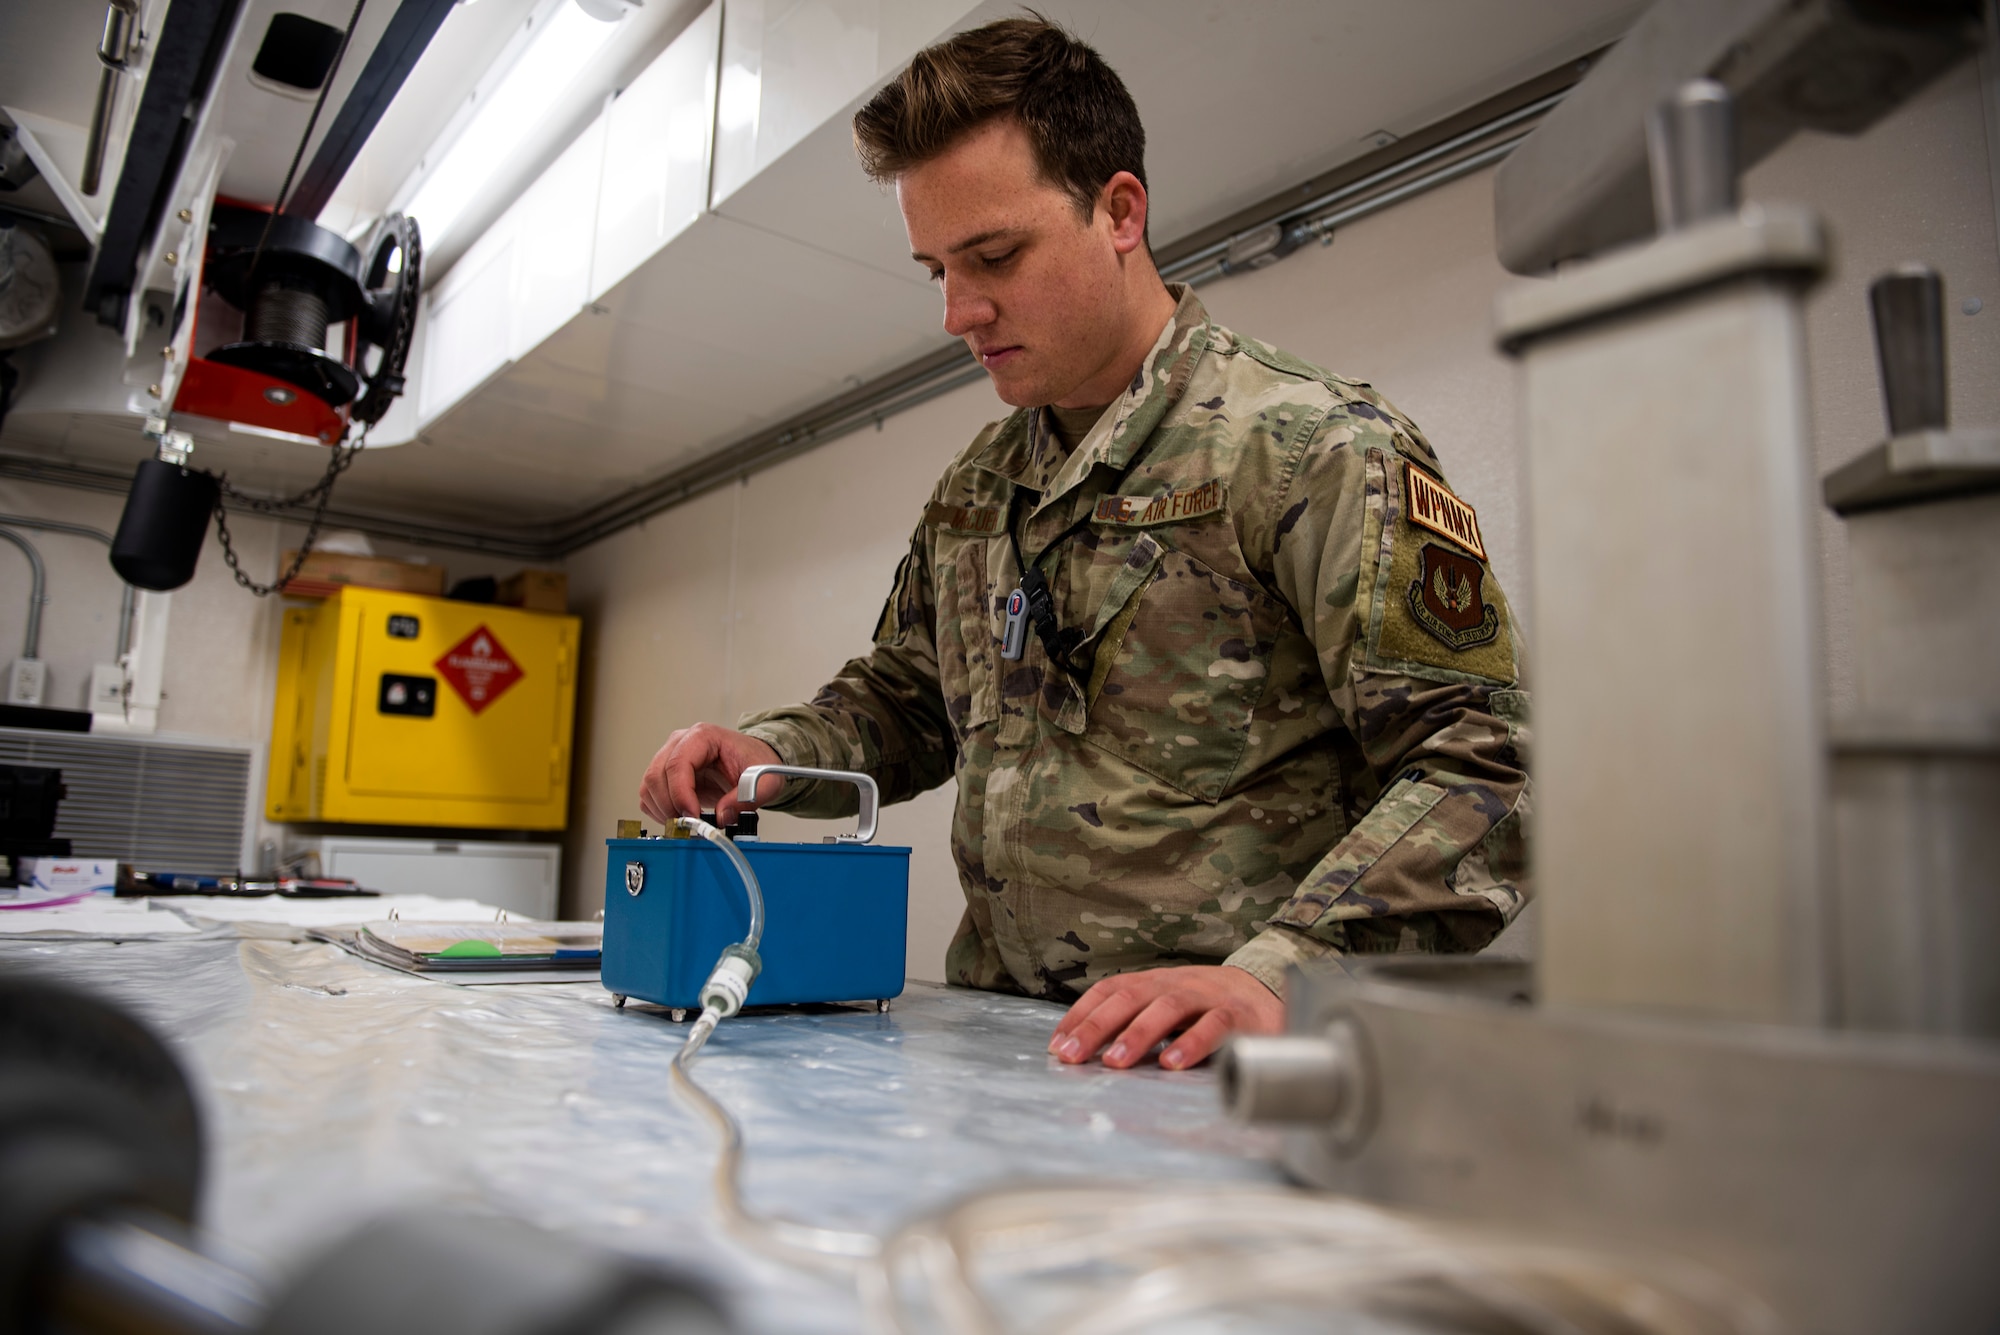 Senior Airman Weston McCuen, a special weapons technician assigned to the 39th Maintenance Squadron, inspects maintenance equipment at Incirlik Air Base, Turkey, Dec. 21, 2021.